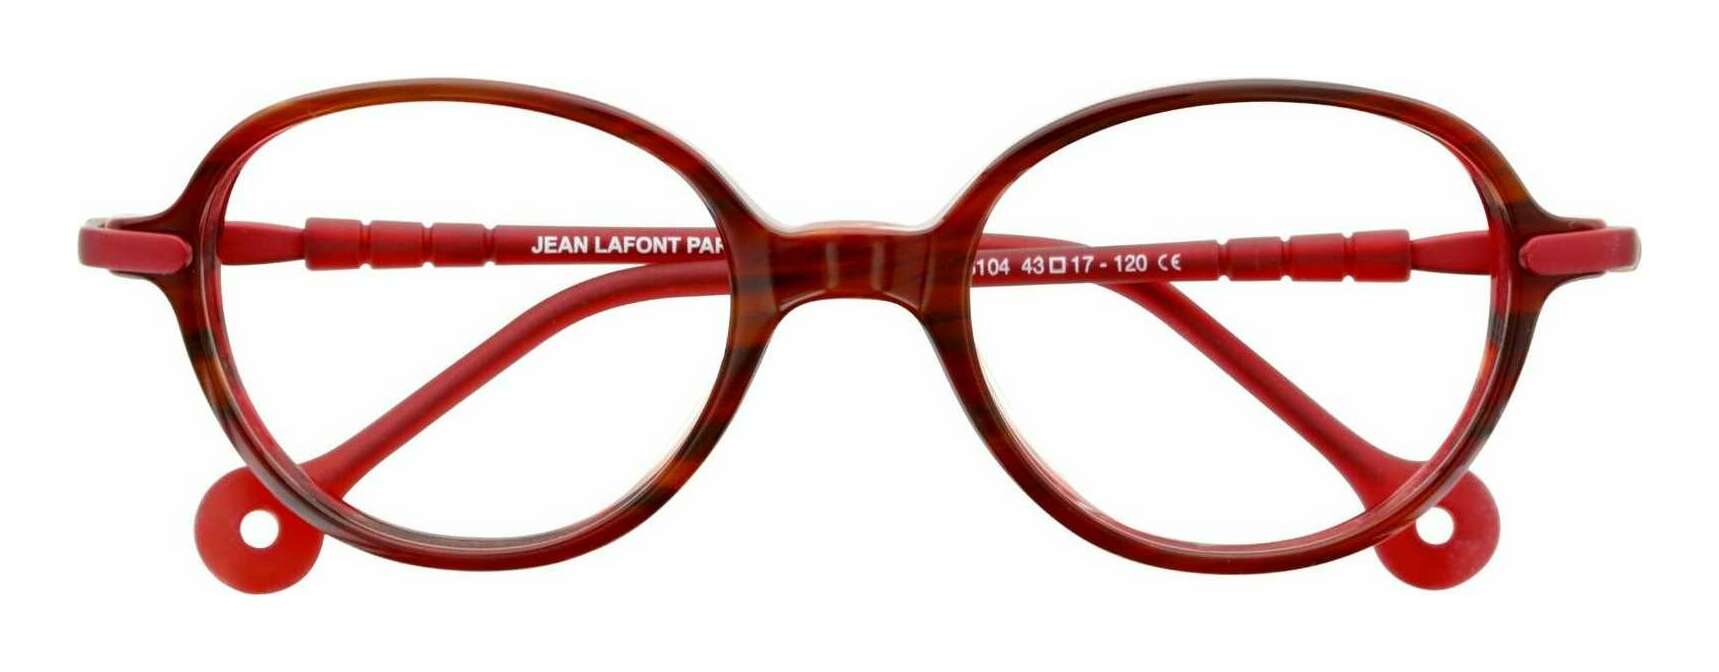 lafont_lafont_icecream_red___pink_ref